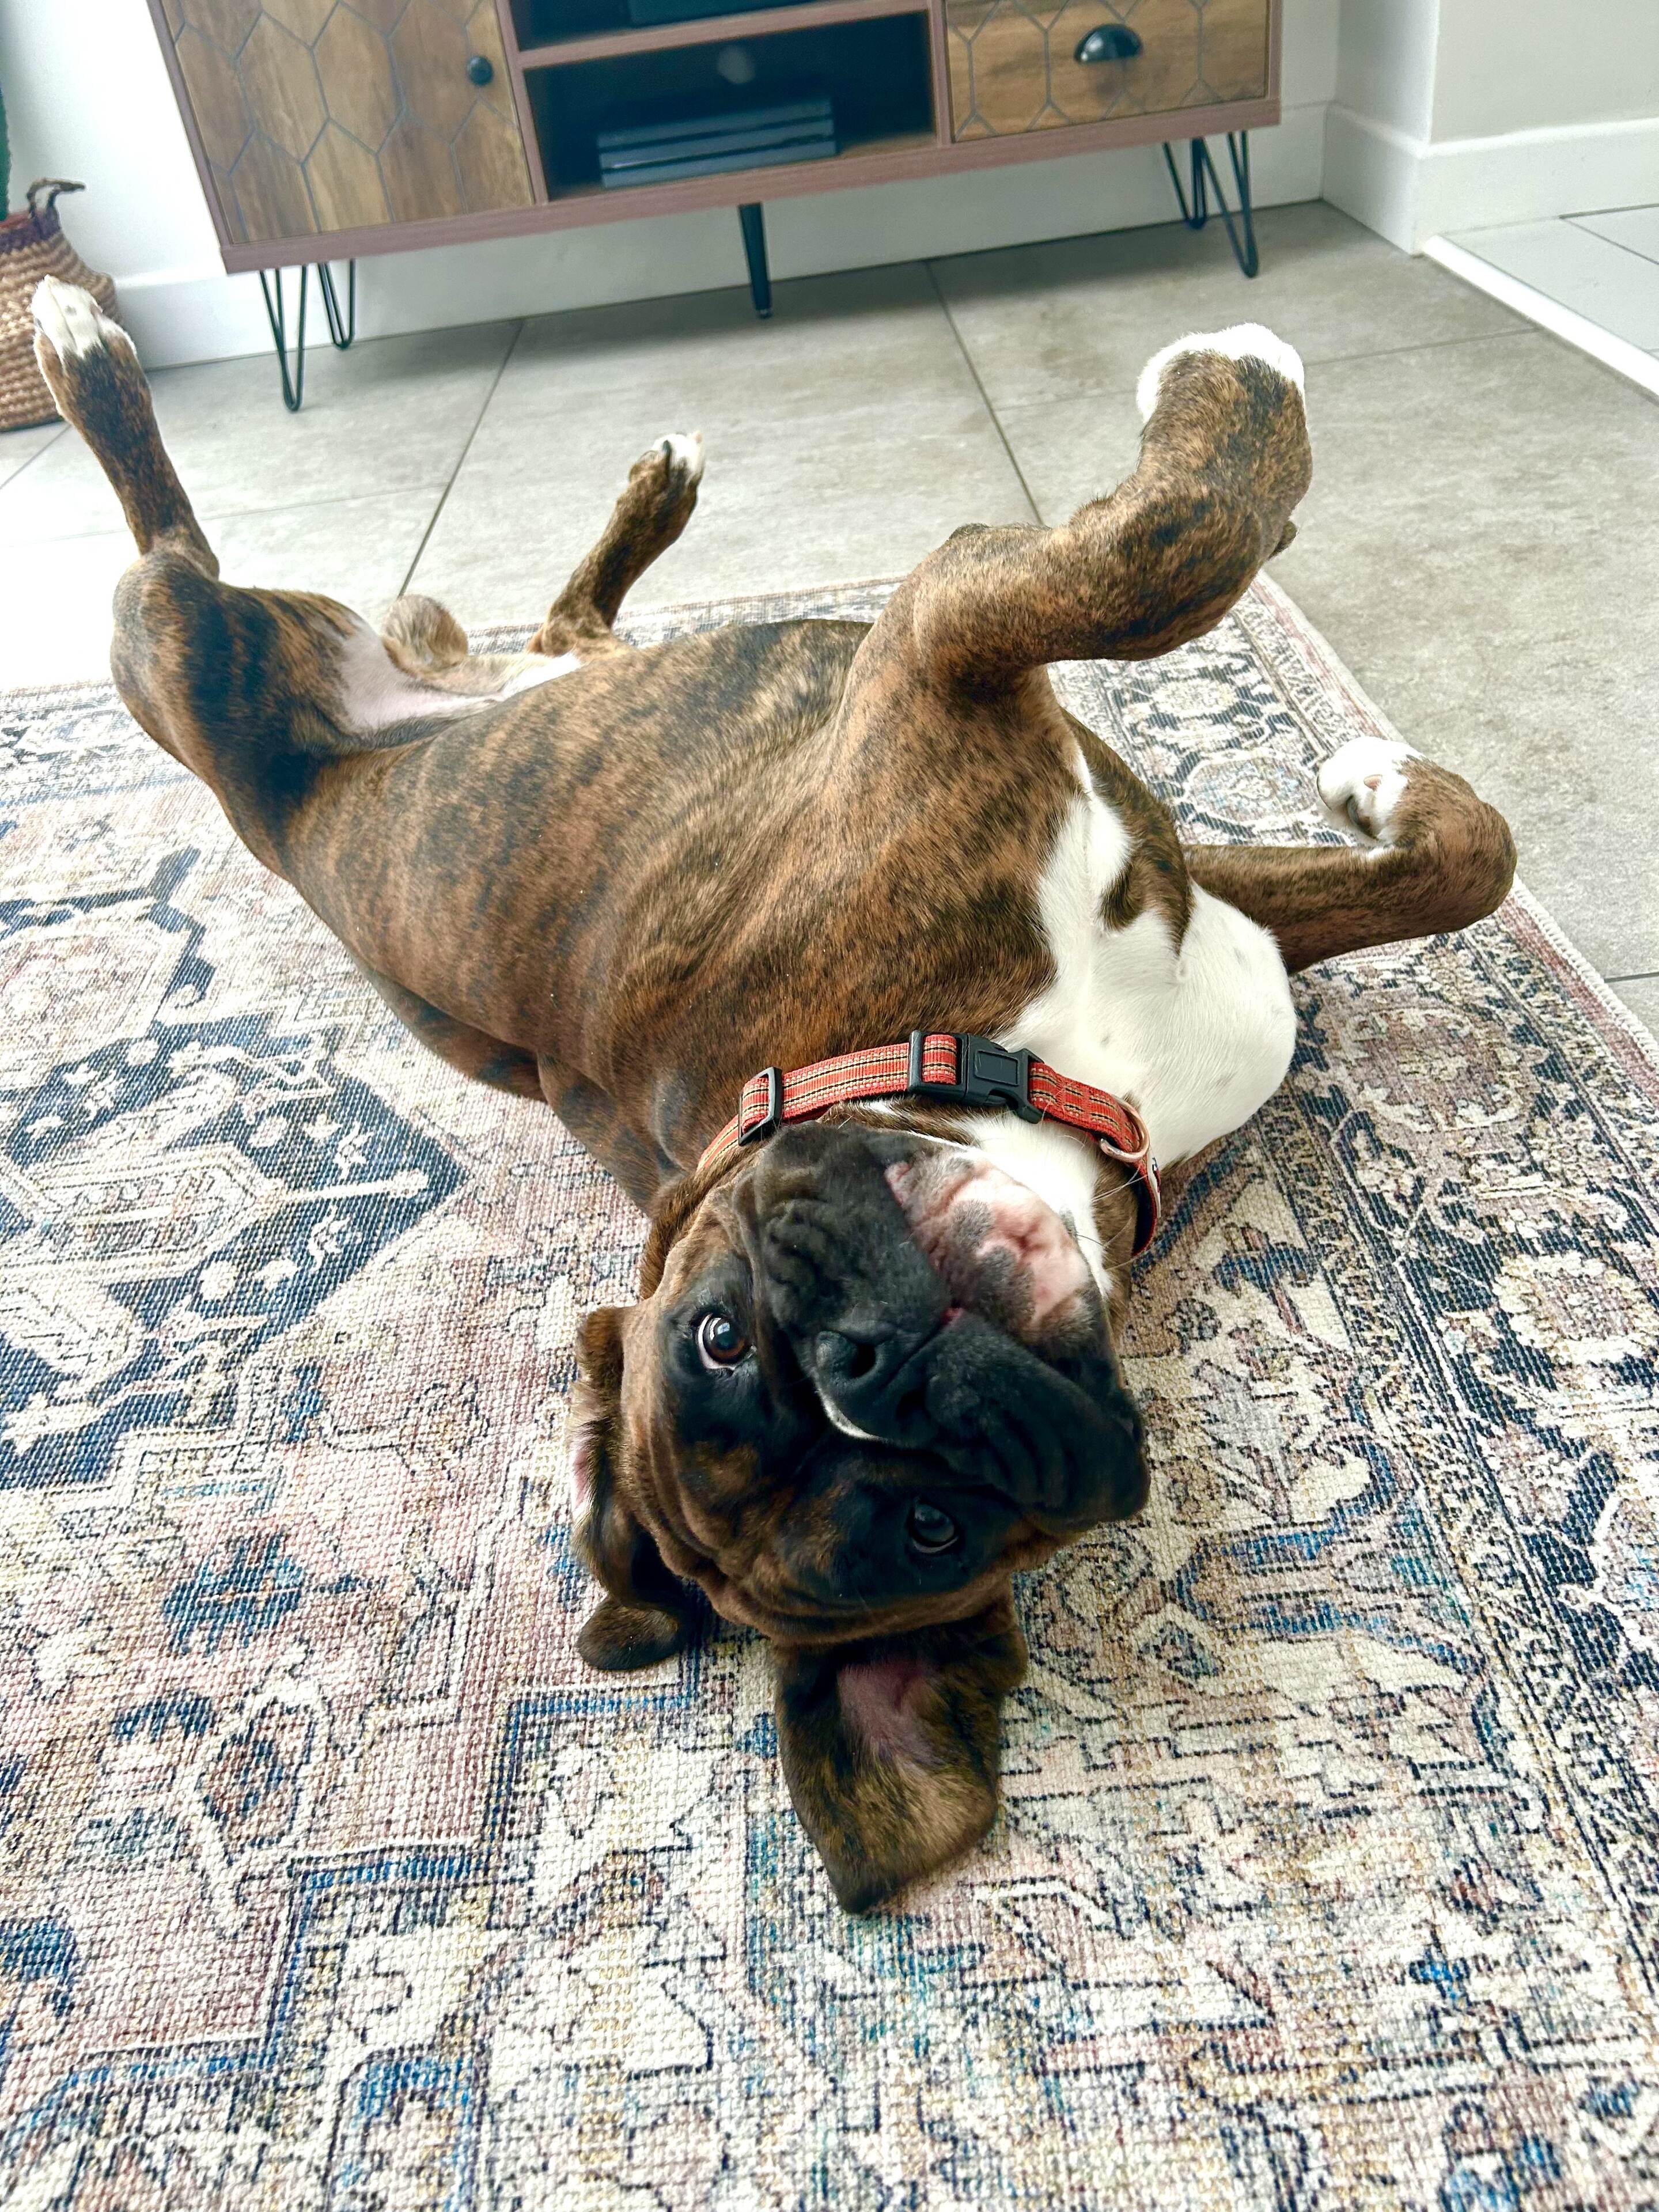 Pistonheads - The image shows a dog lying on its back in the center of a rug with its paws extended. The dog has a large, floppy ear and is wearing a red collar with tags. It appears to be relaxed or perhaps playful, with its head turned towards the camera. In the background, there's a living room setting with furniture partially visible, including a chair and a couch. There's no text on the image.